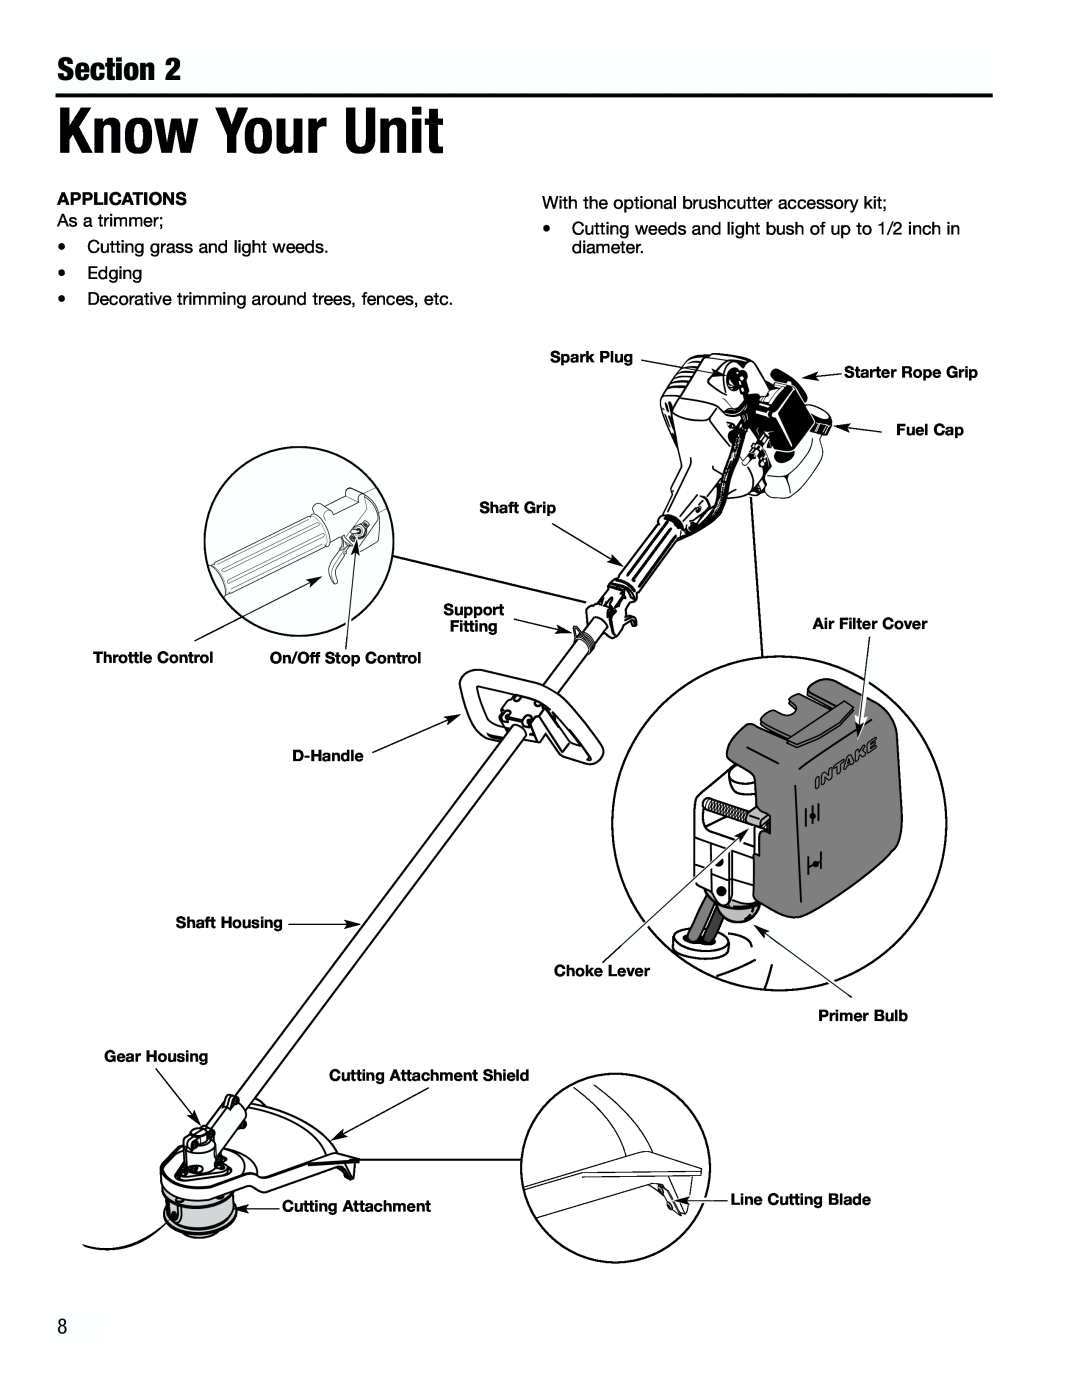 Troy-Bilt TB3000 manual Know Your Unit, Section, Applications 